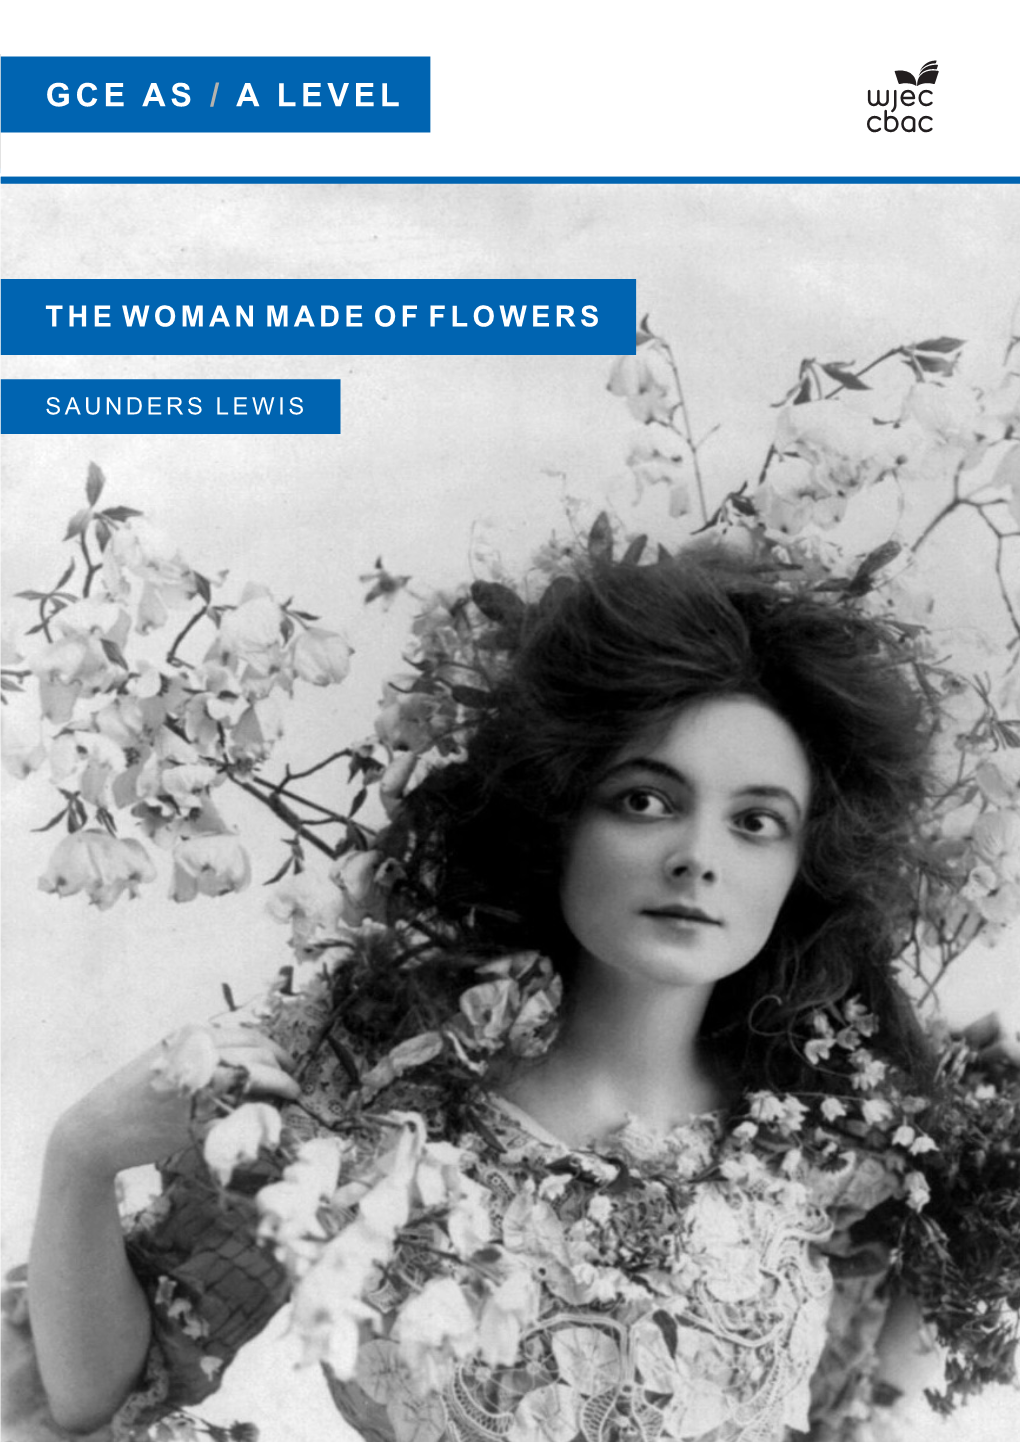 The Woman Made of Flowers